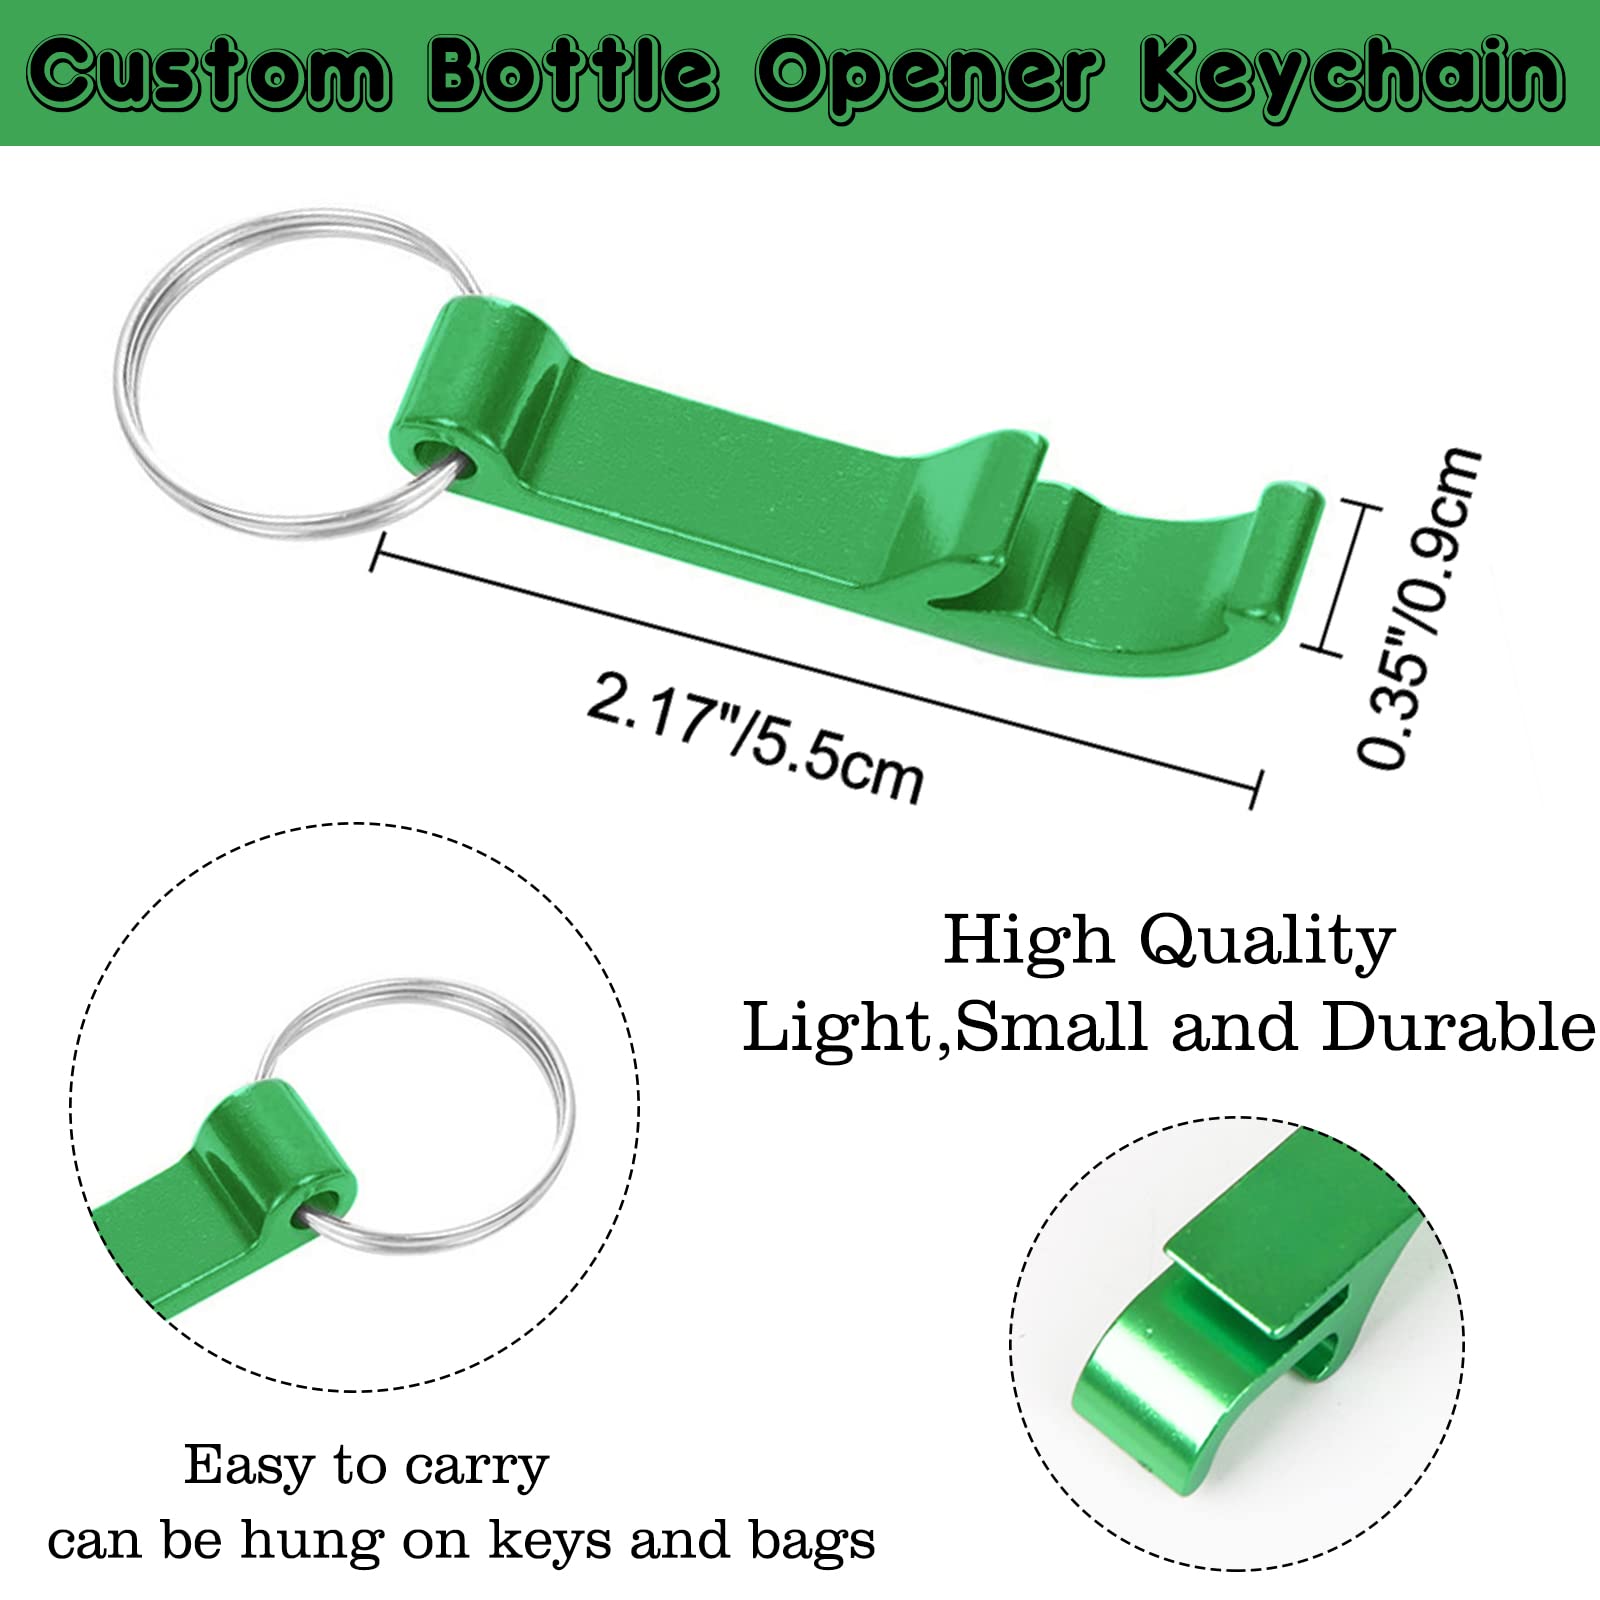 100PCS Personalized Bottle Opener Keychain Bulk Custom Beer Bottle Opener with Logo Text Engraved Wedding Bottle Opener Favors Customized Gifts for Guests Baby Shower Birthday Party-Assorted